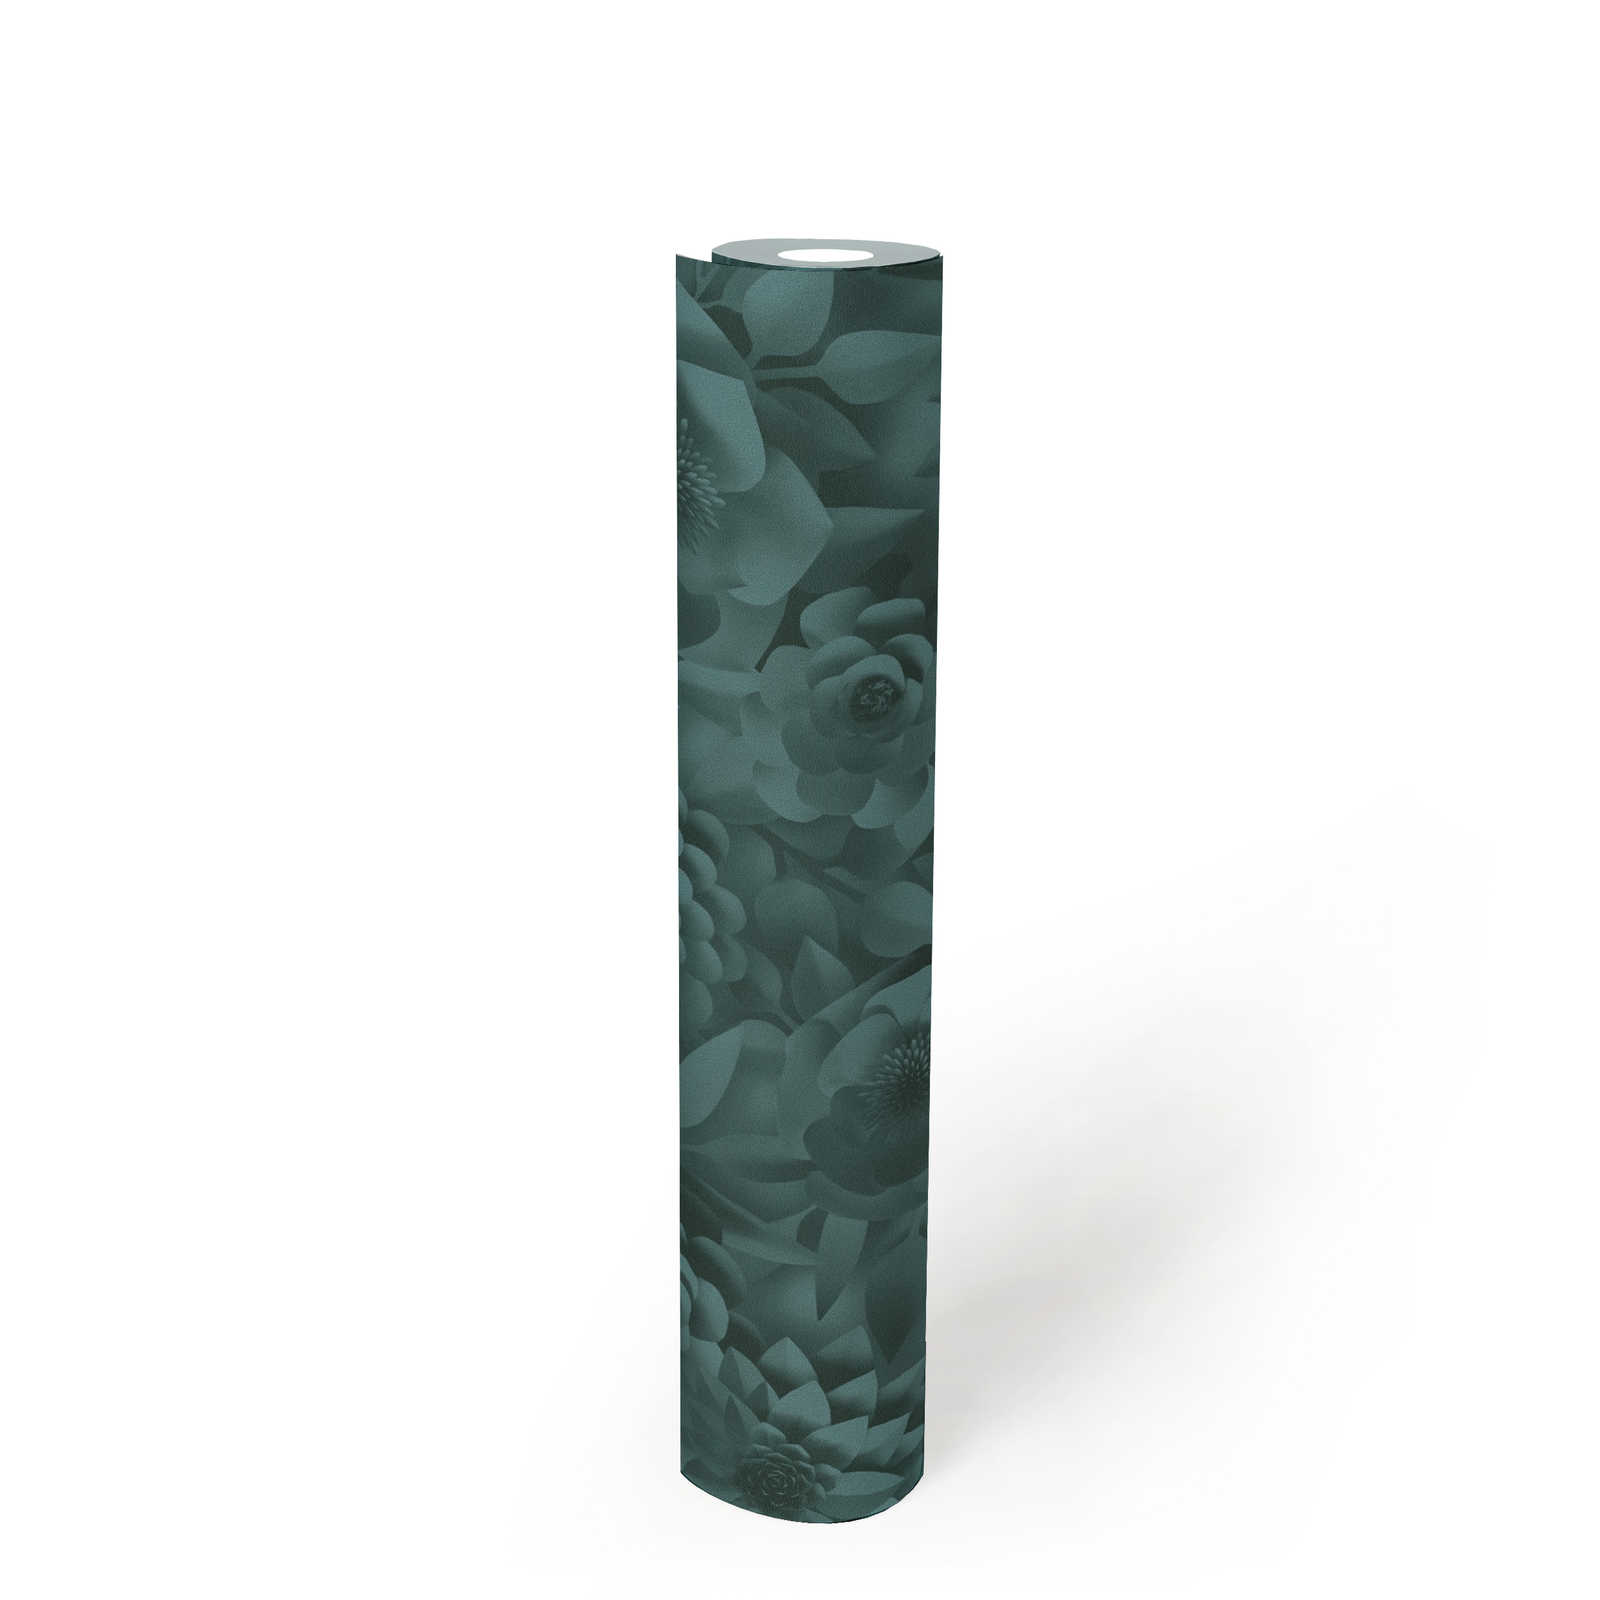             3D wallpaper with paper flowers, graphic floral pattern - green
        